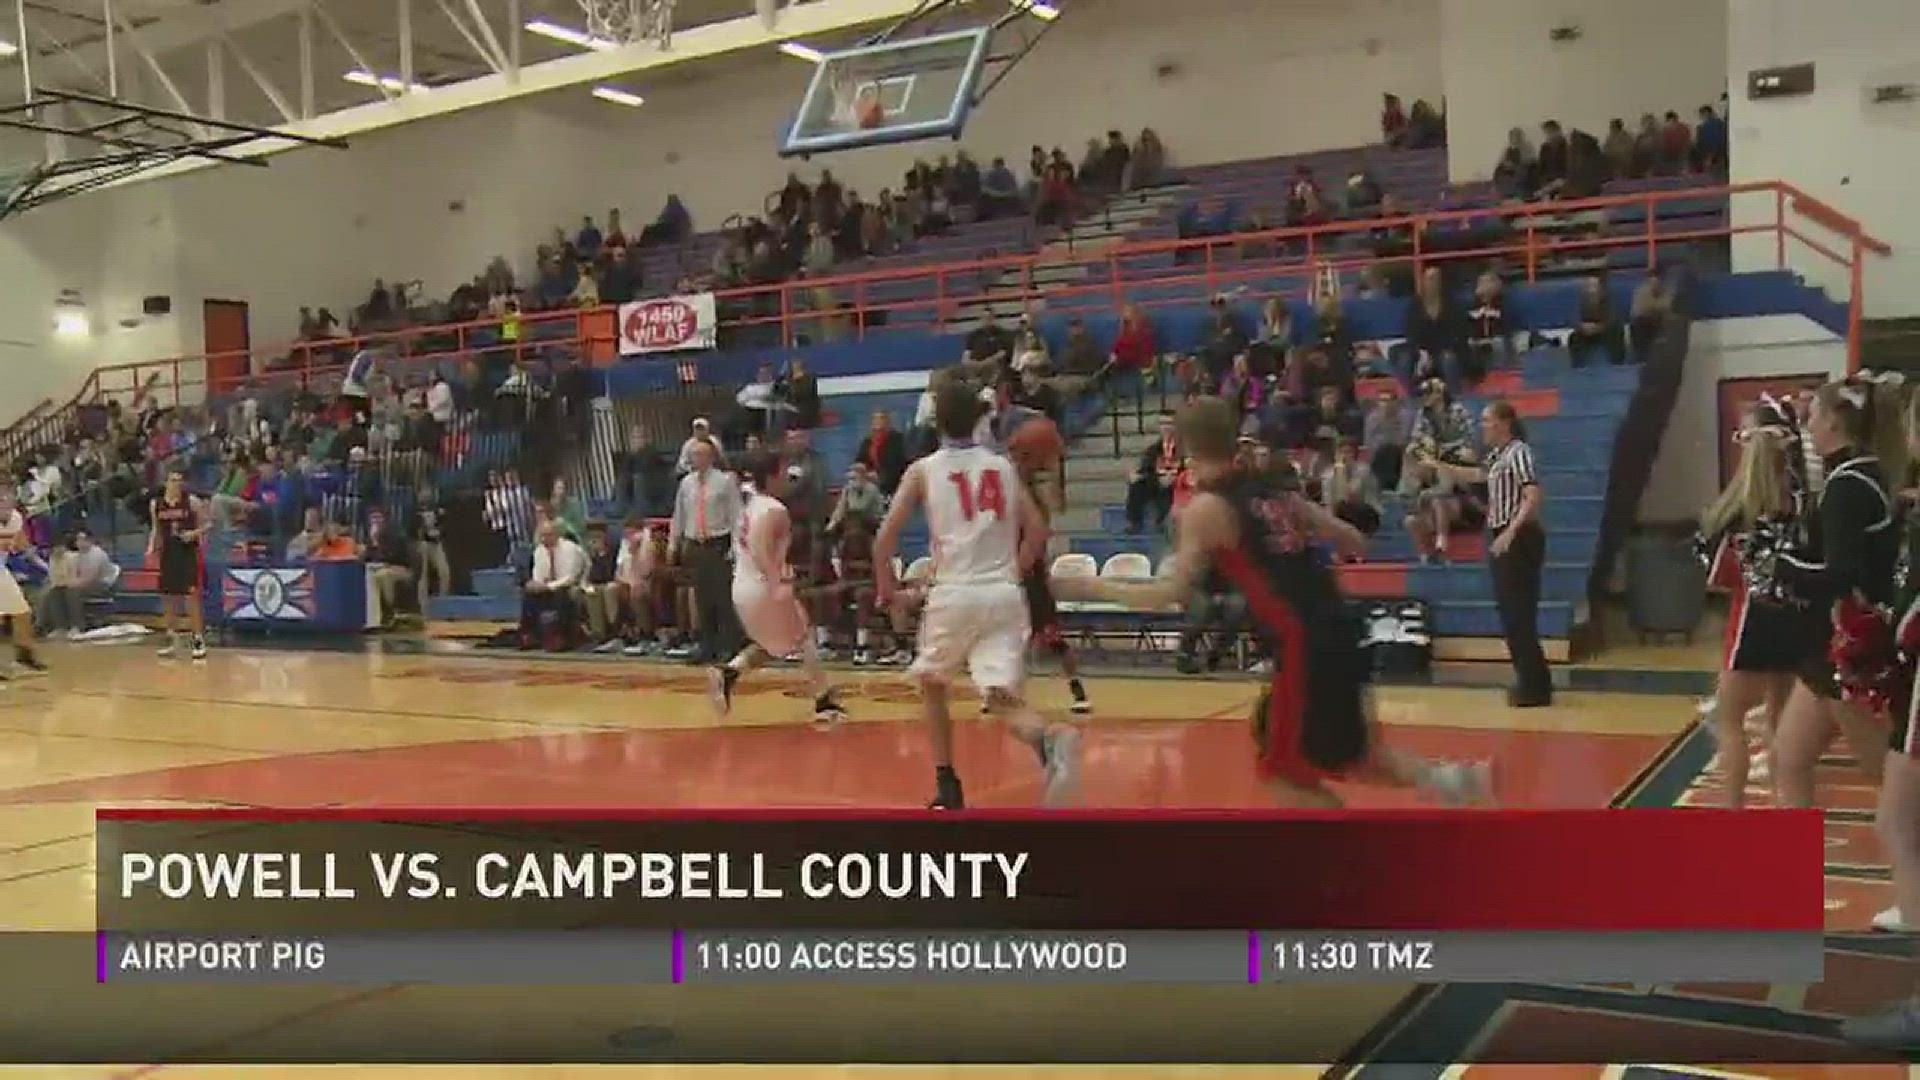 Powell beats Campbell County 59-37.